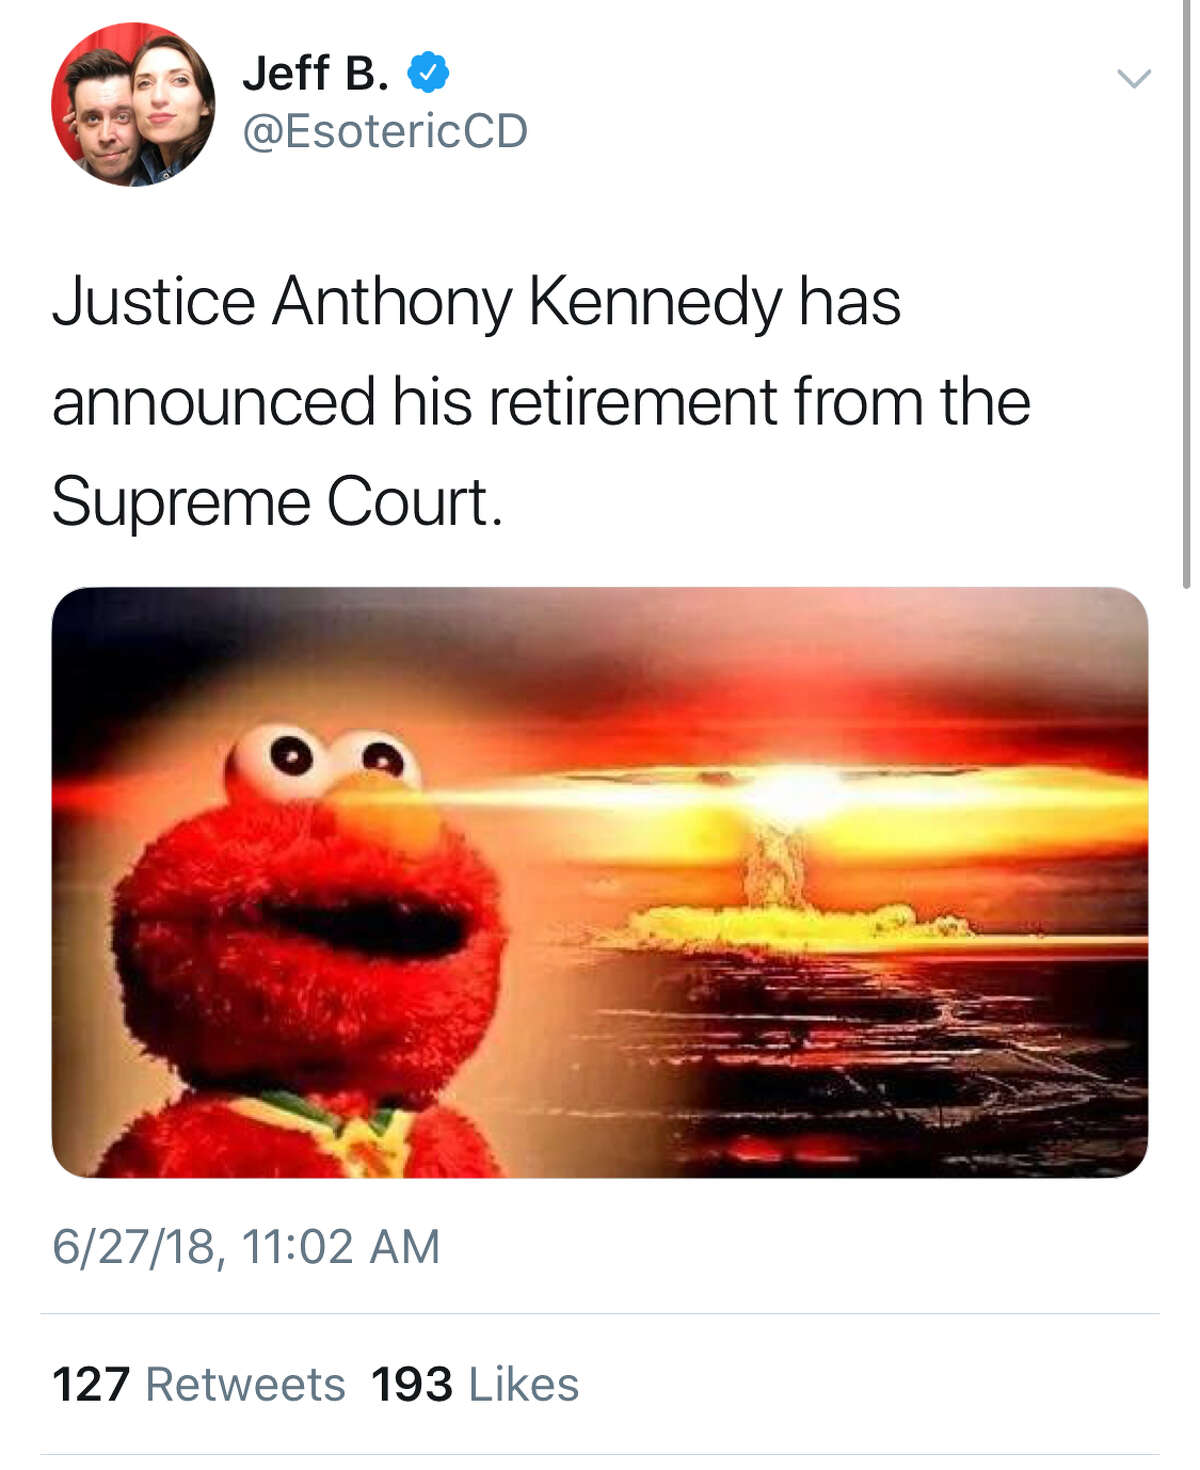 People took to Twitter to react to news of Justice Anthony Kennedy's retirement from the Supreme Court.